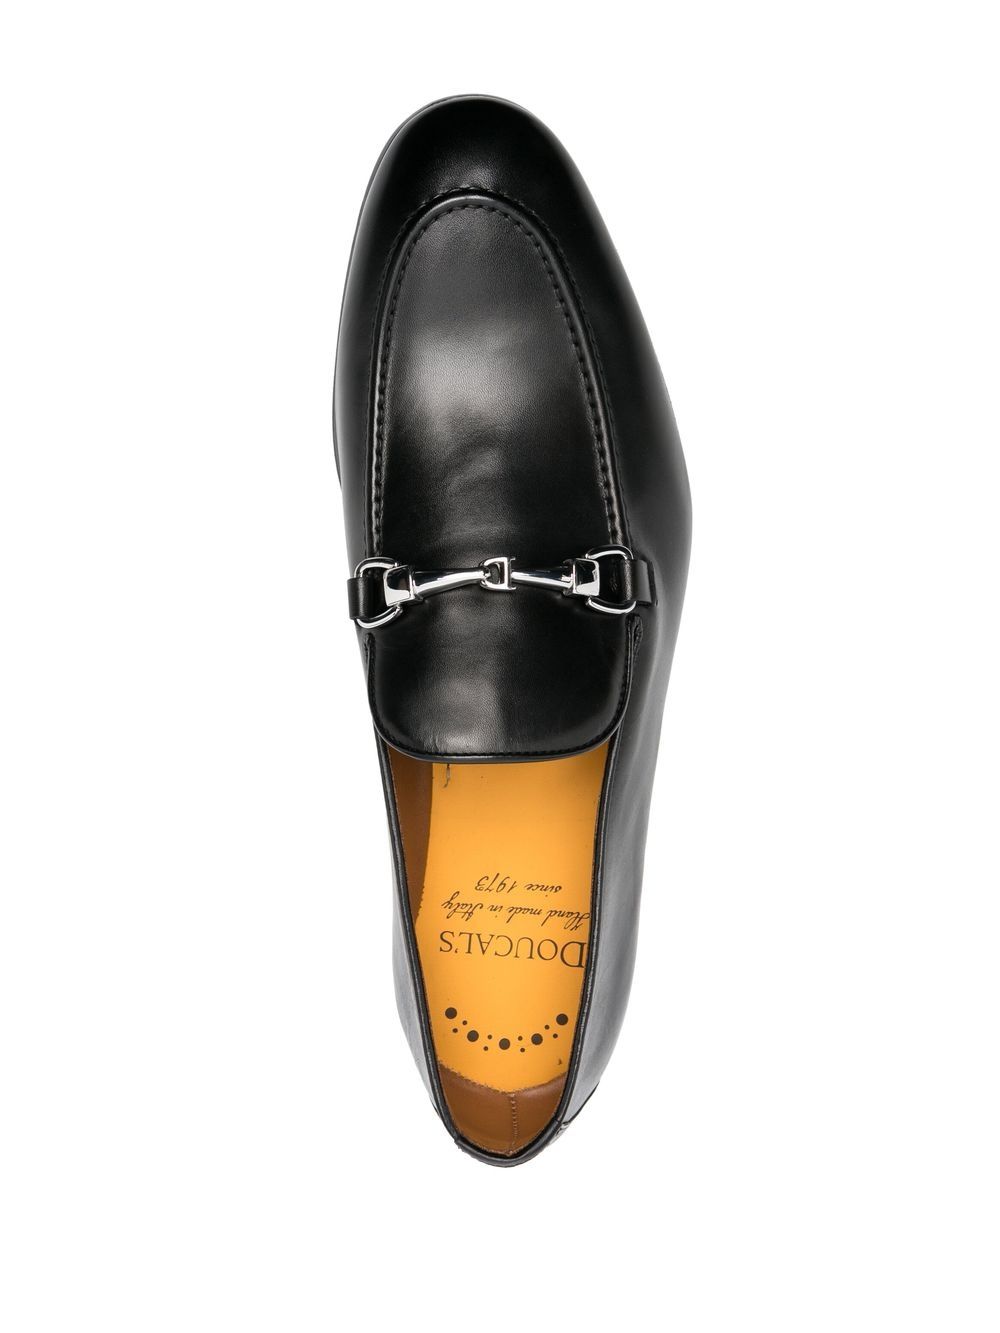 Shop Doucal's Almond-toe Leather Loafers In Schwarz